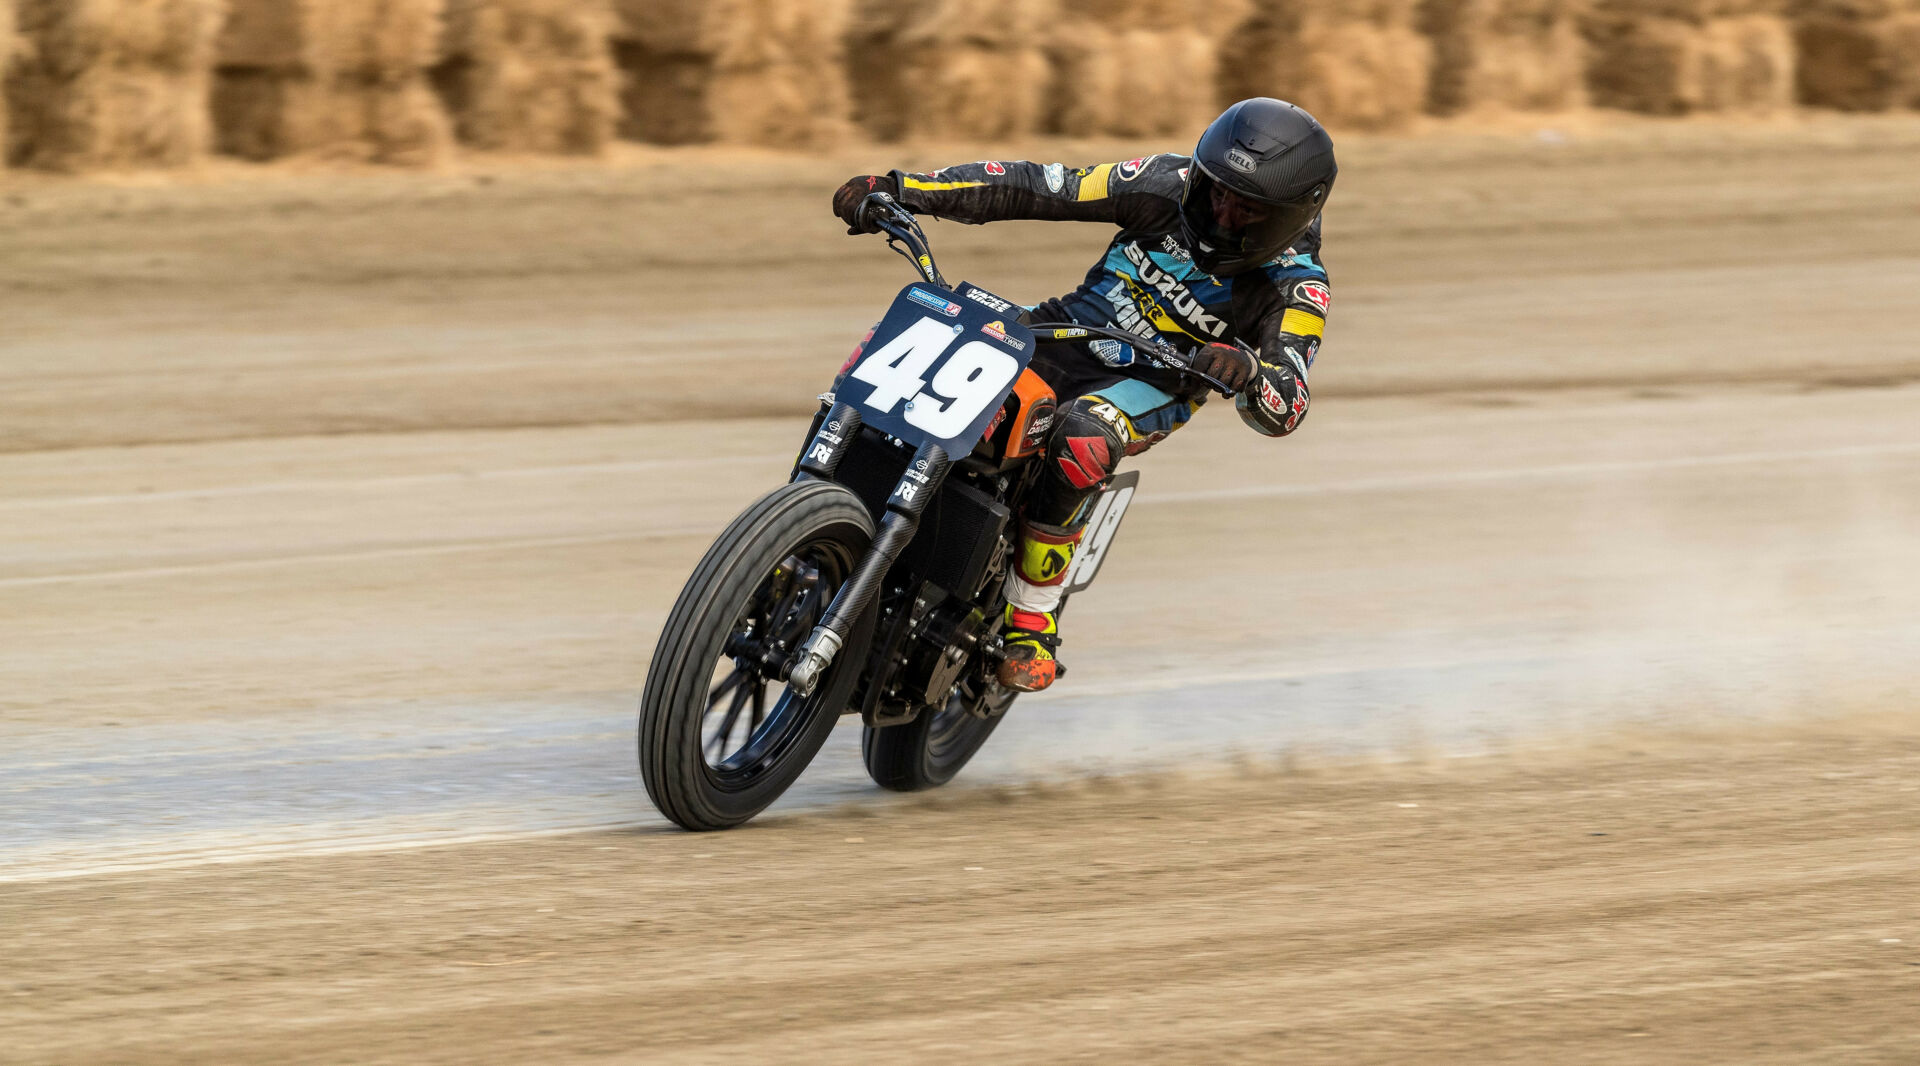 Chad Cose (49) in action during the 2022 AFT Production Twins season. Photo by Tim Lester, courtesy AFT.